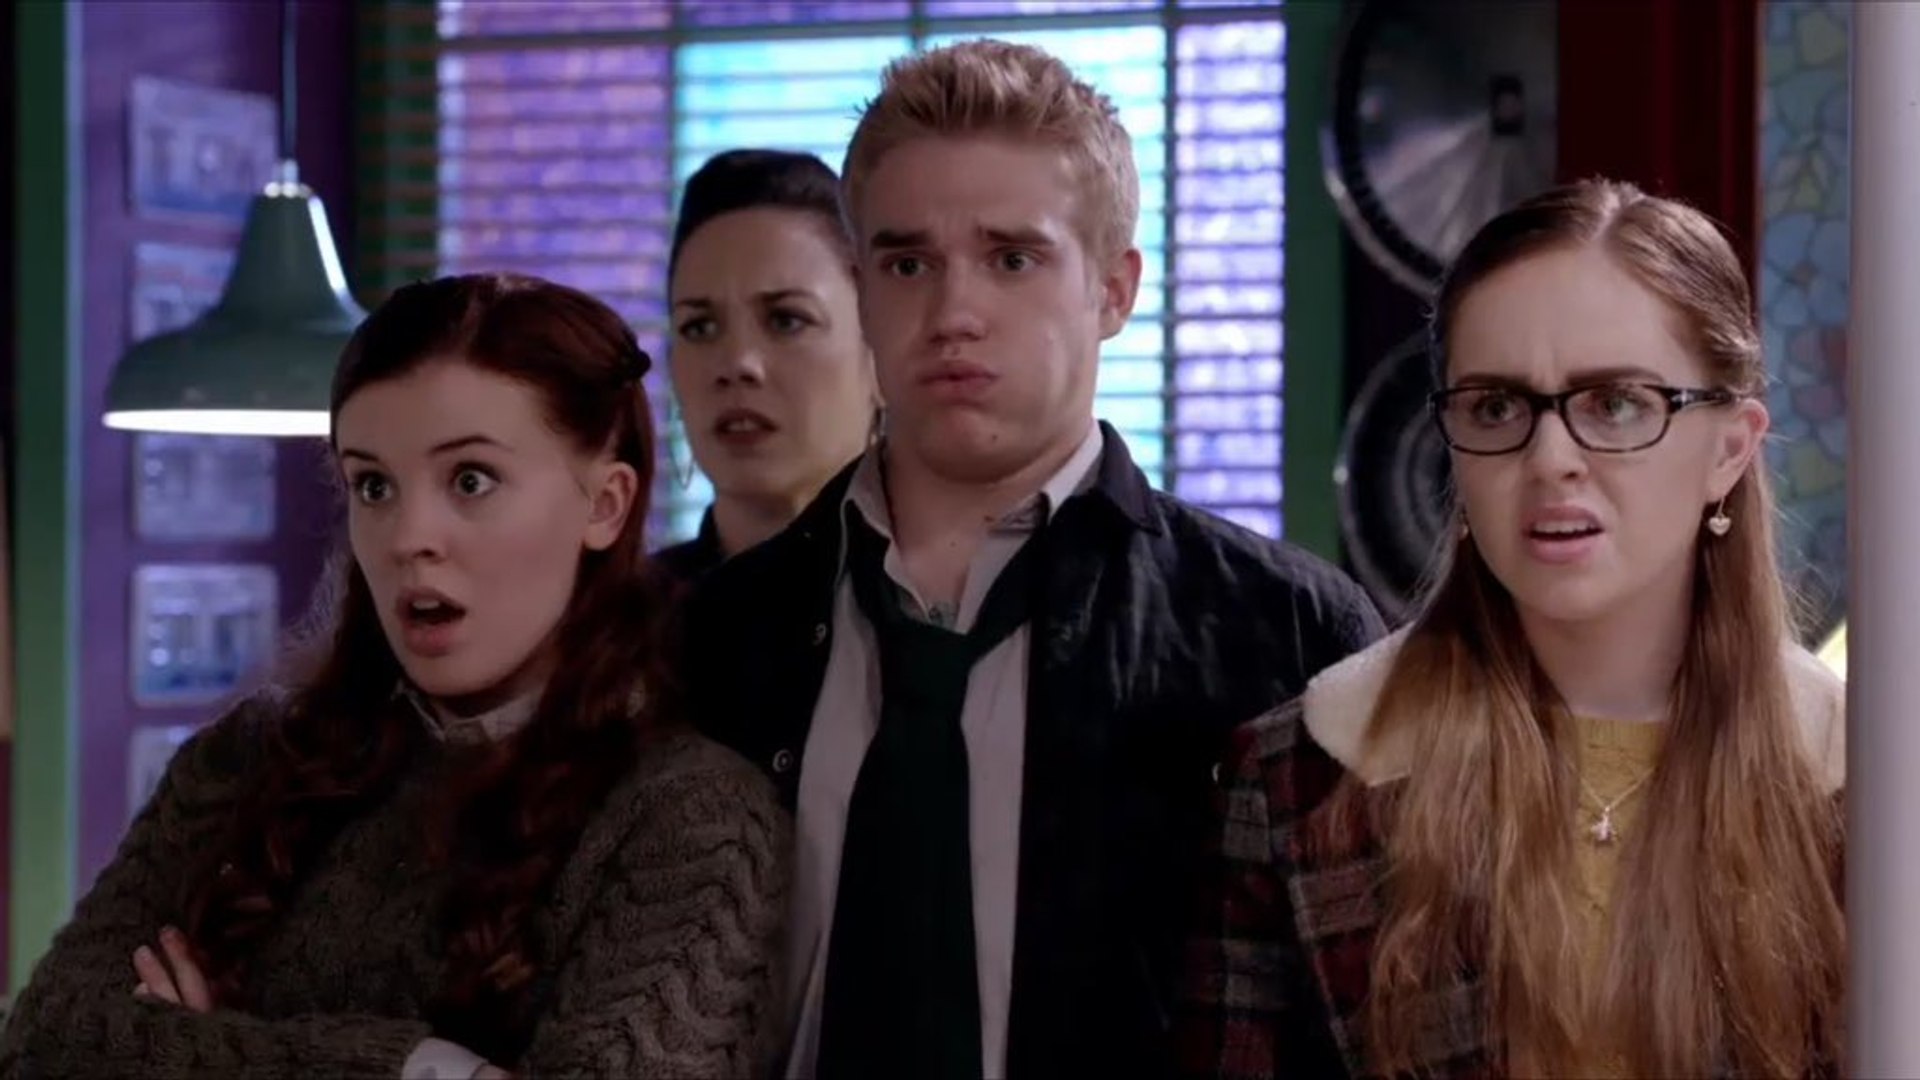 A scene from Wolfblood